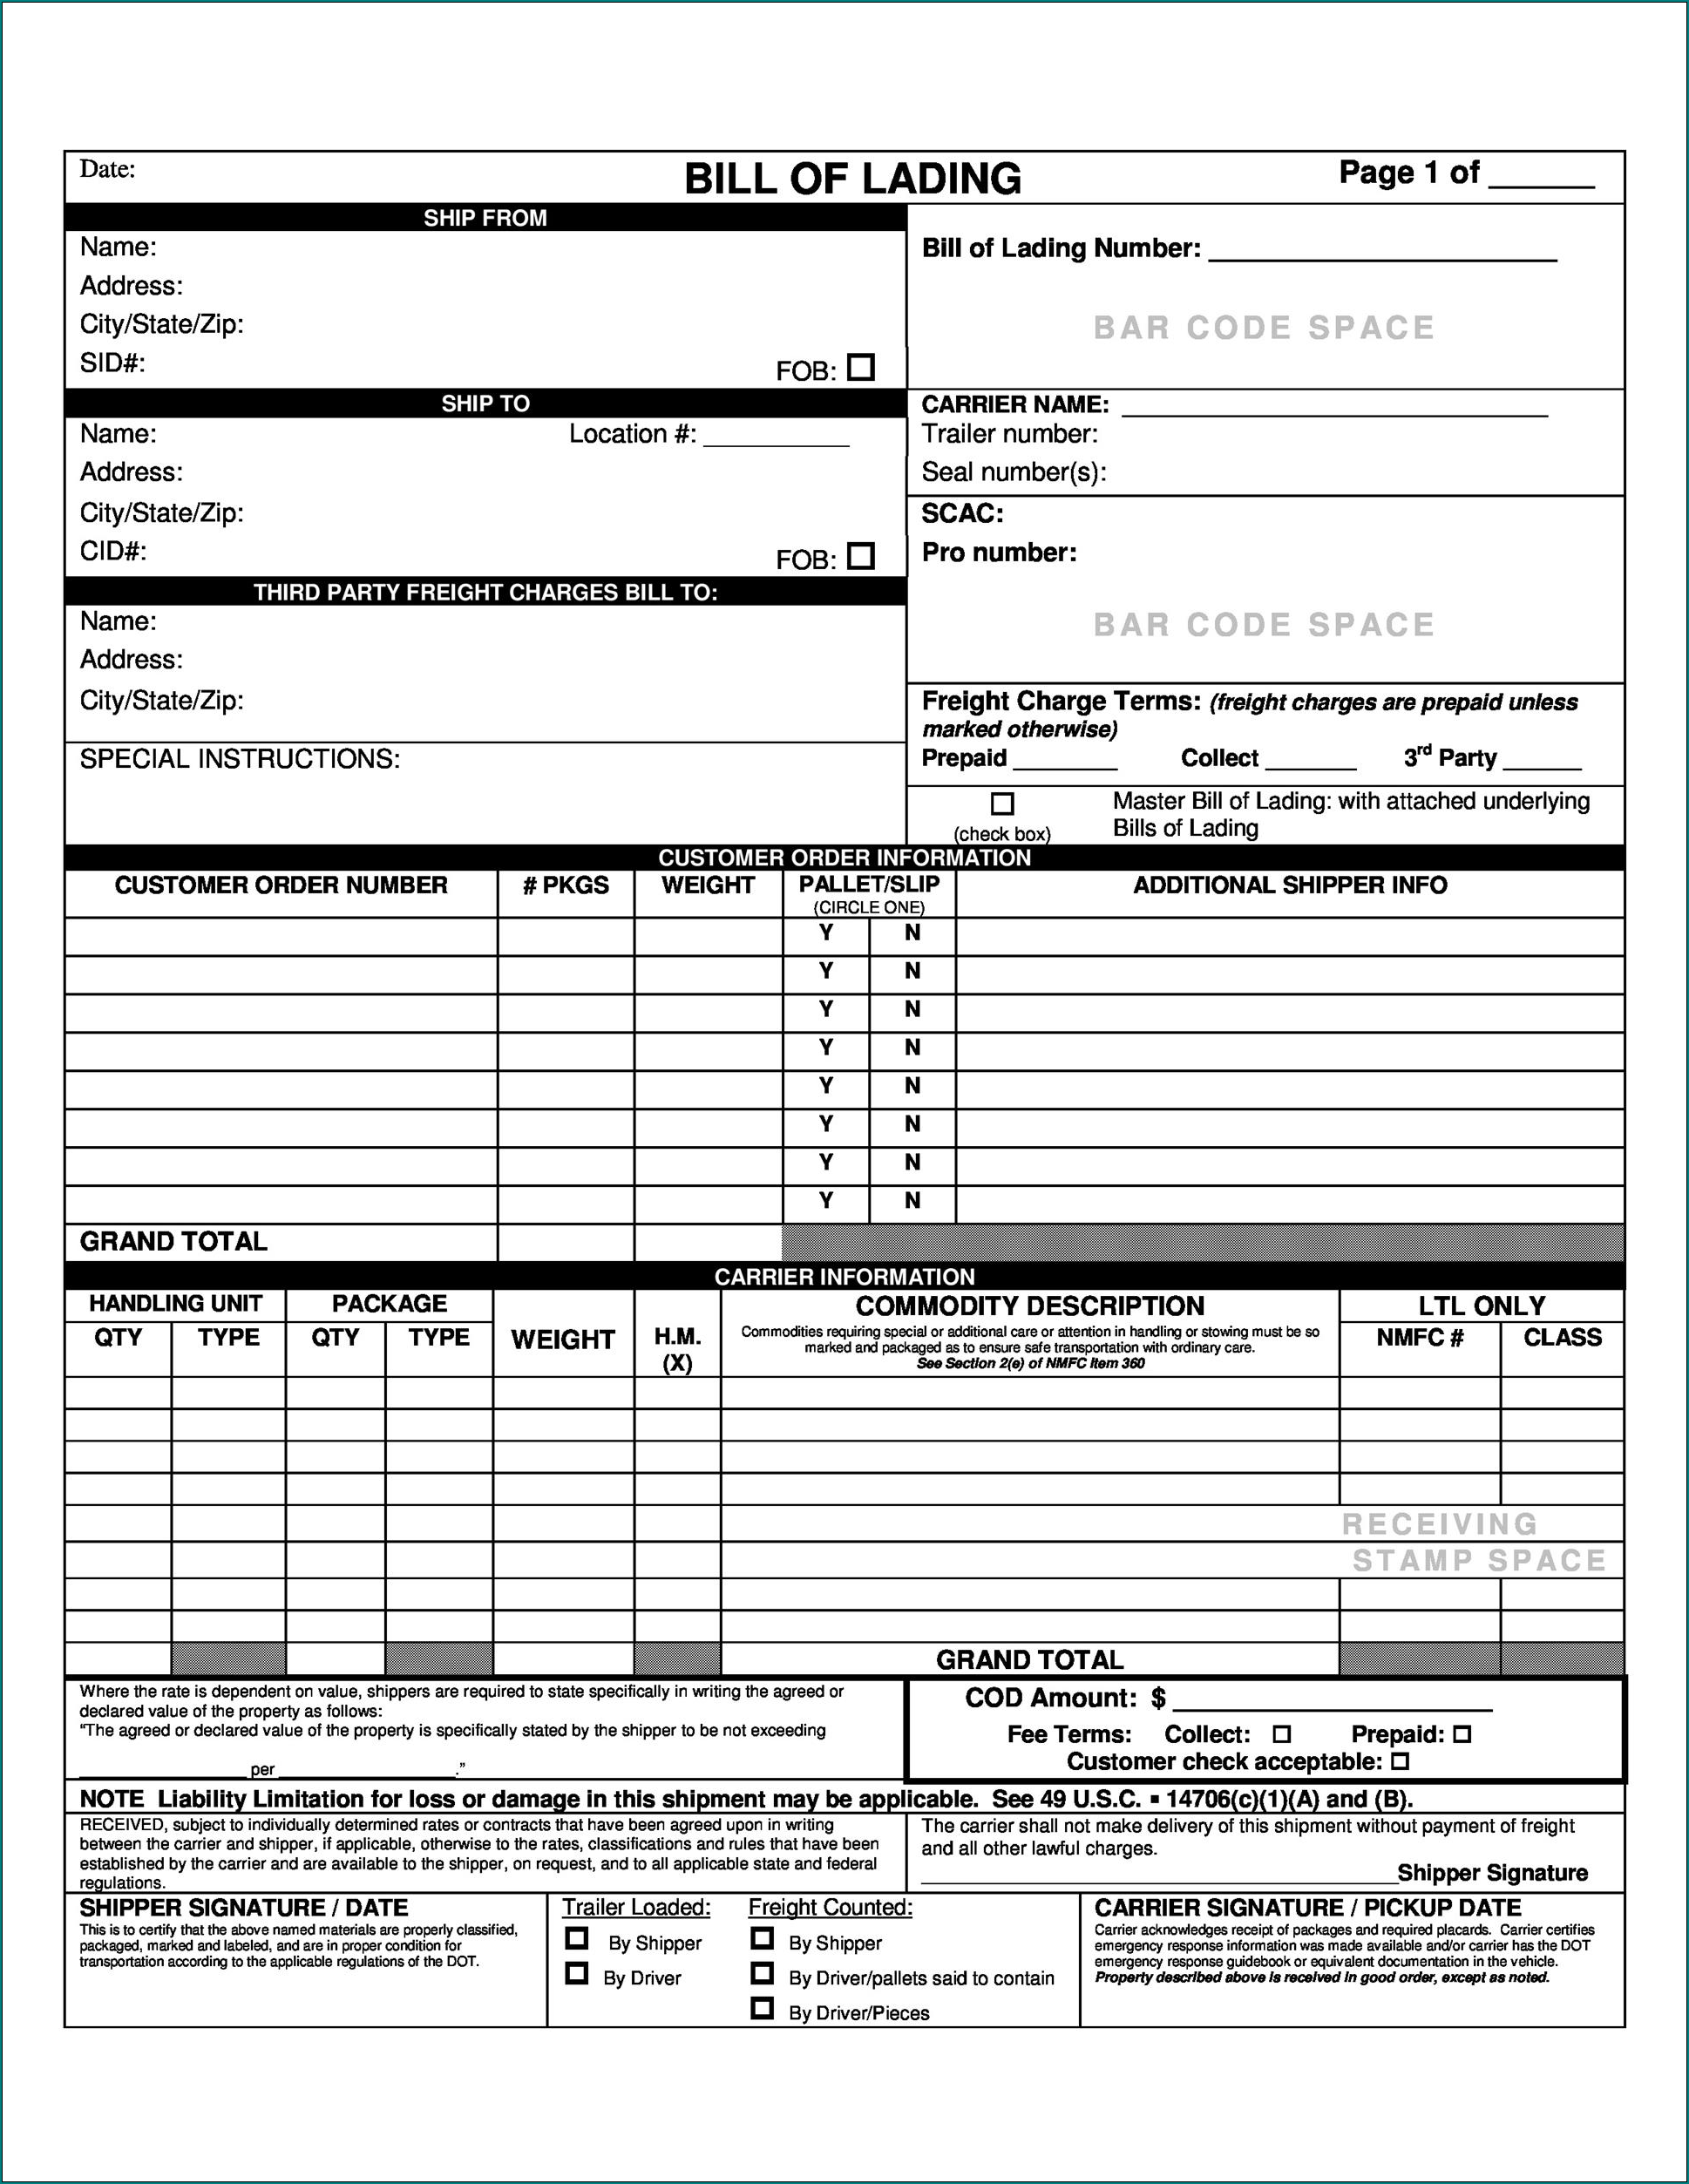 Example of Blank Bill Of Lading Form